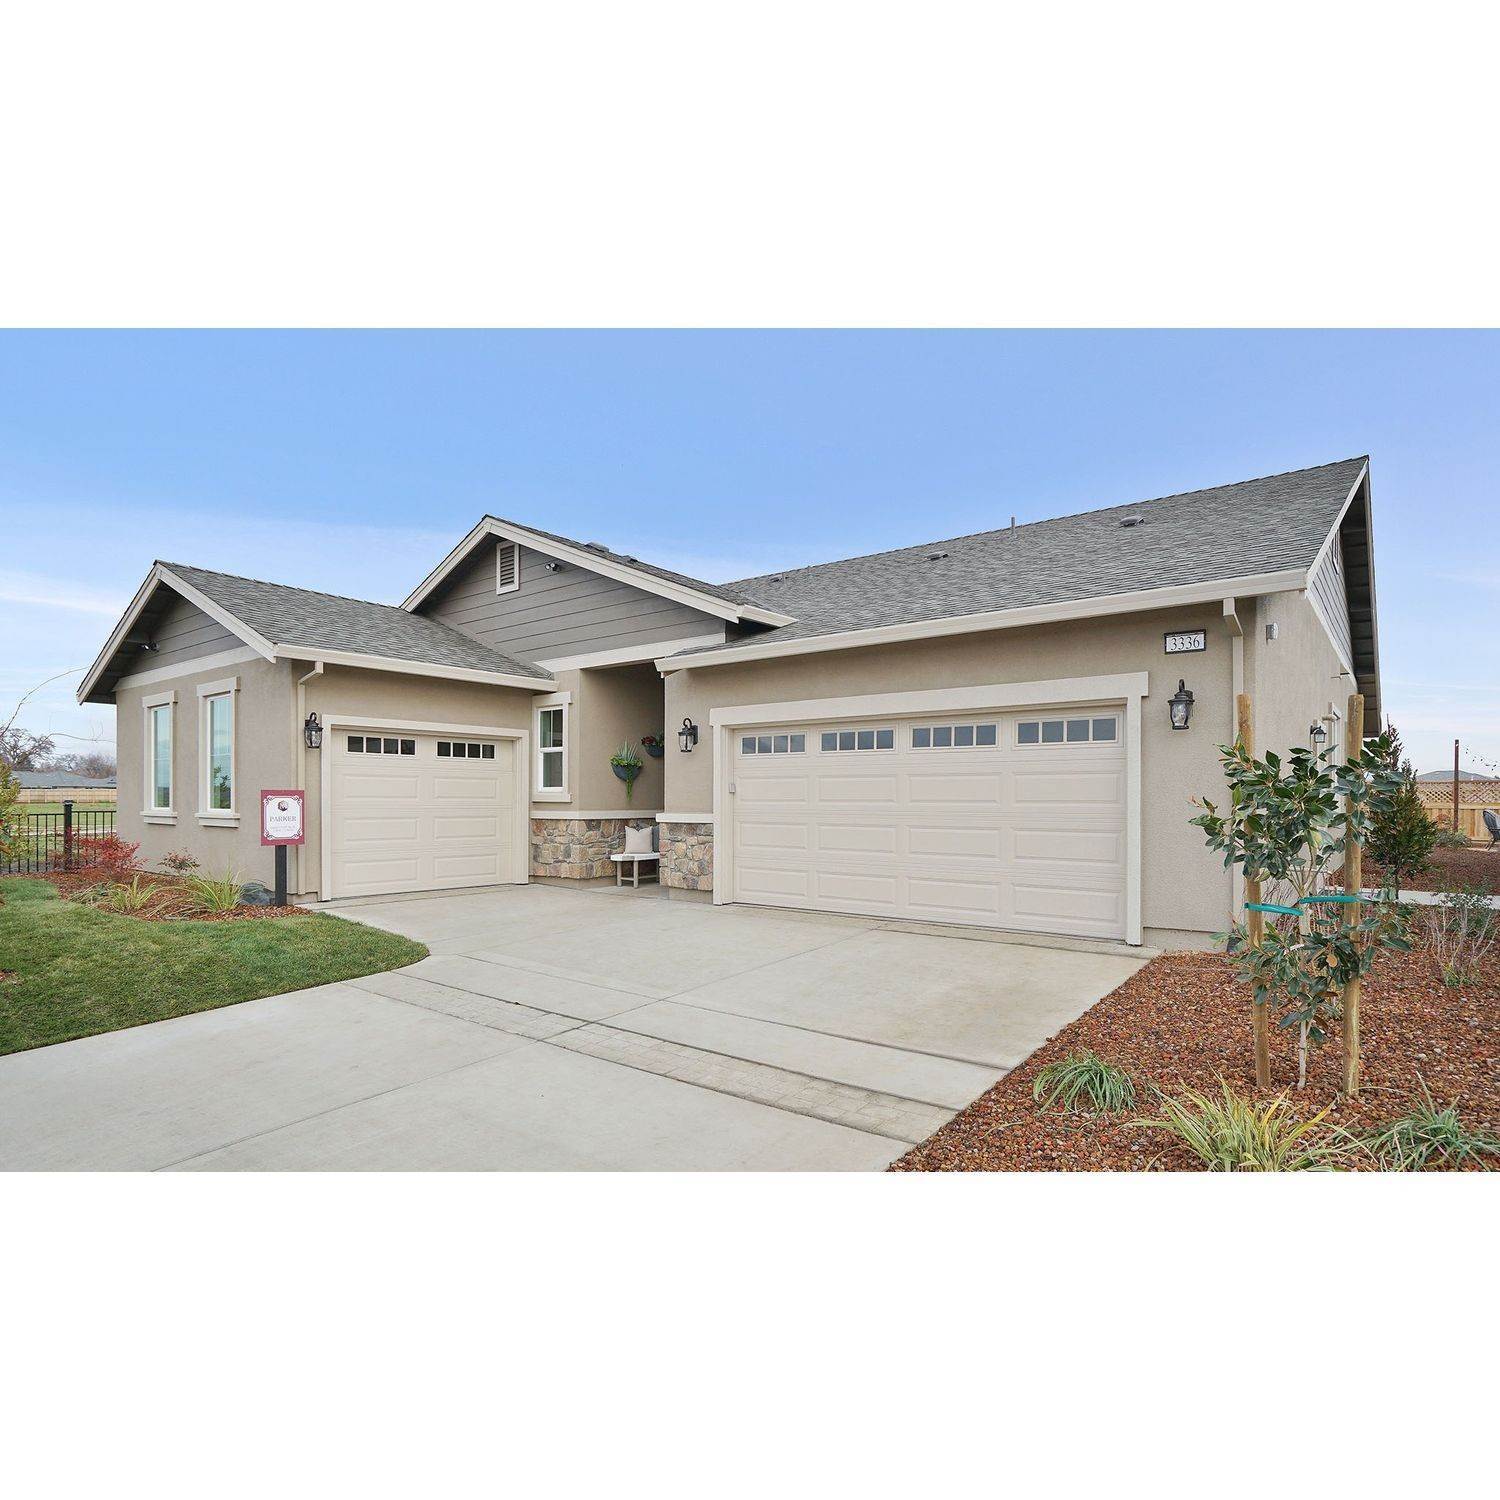 Single Family for Active at Spur 3442 Chamberlain Run CHICO, CALIFORNIA 95973 UNITED STATES